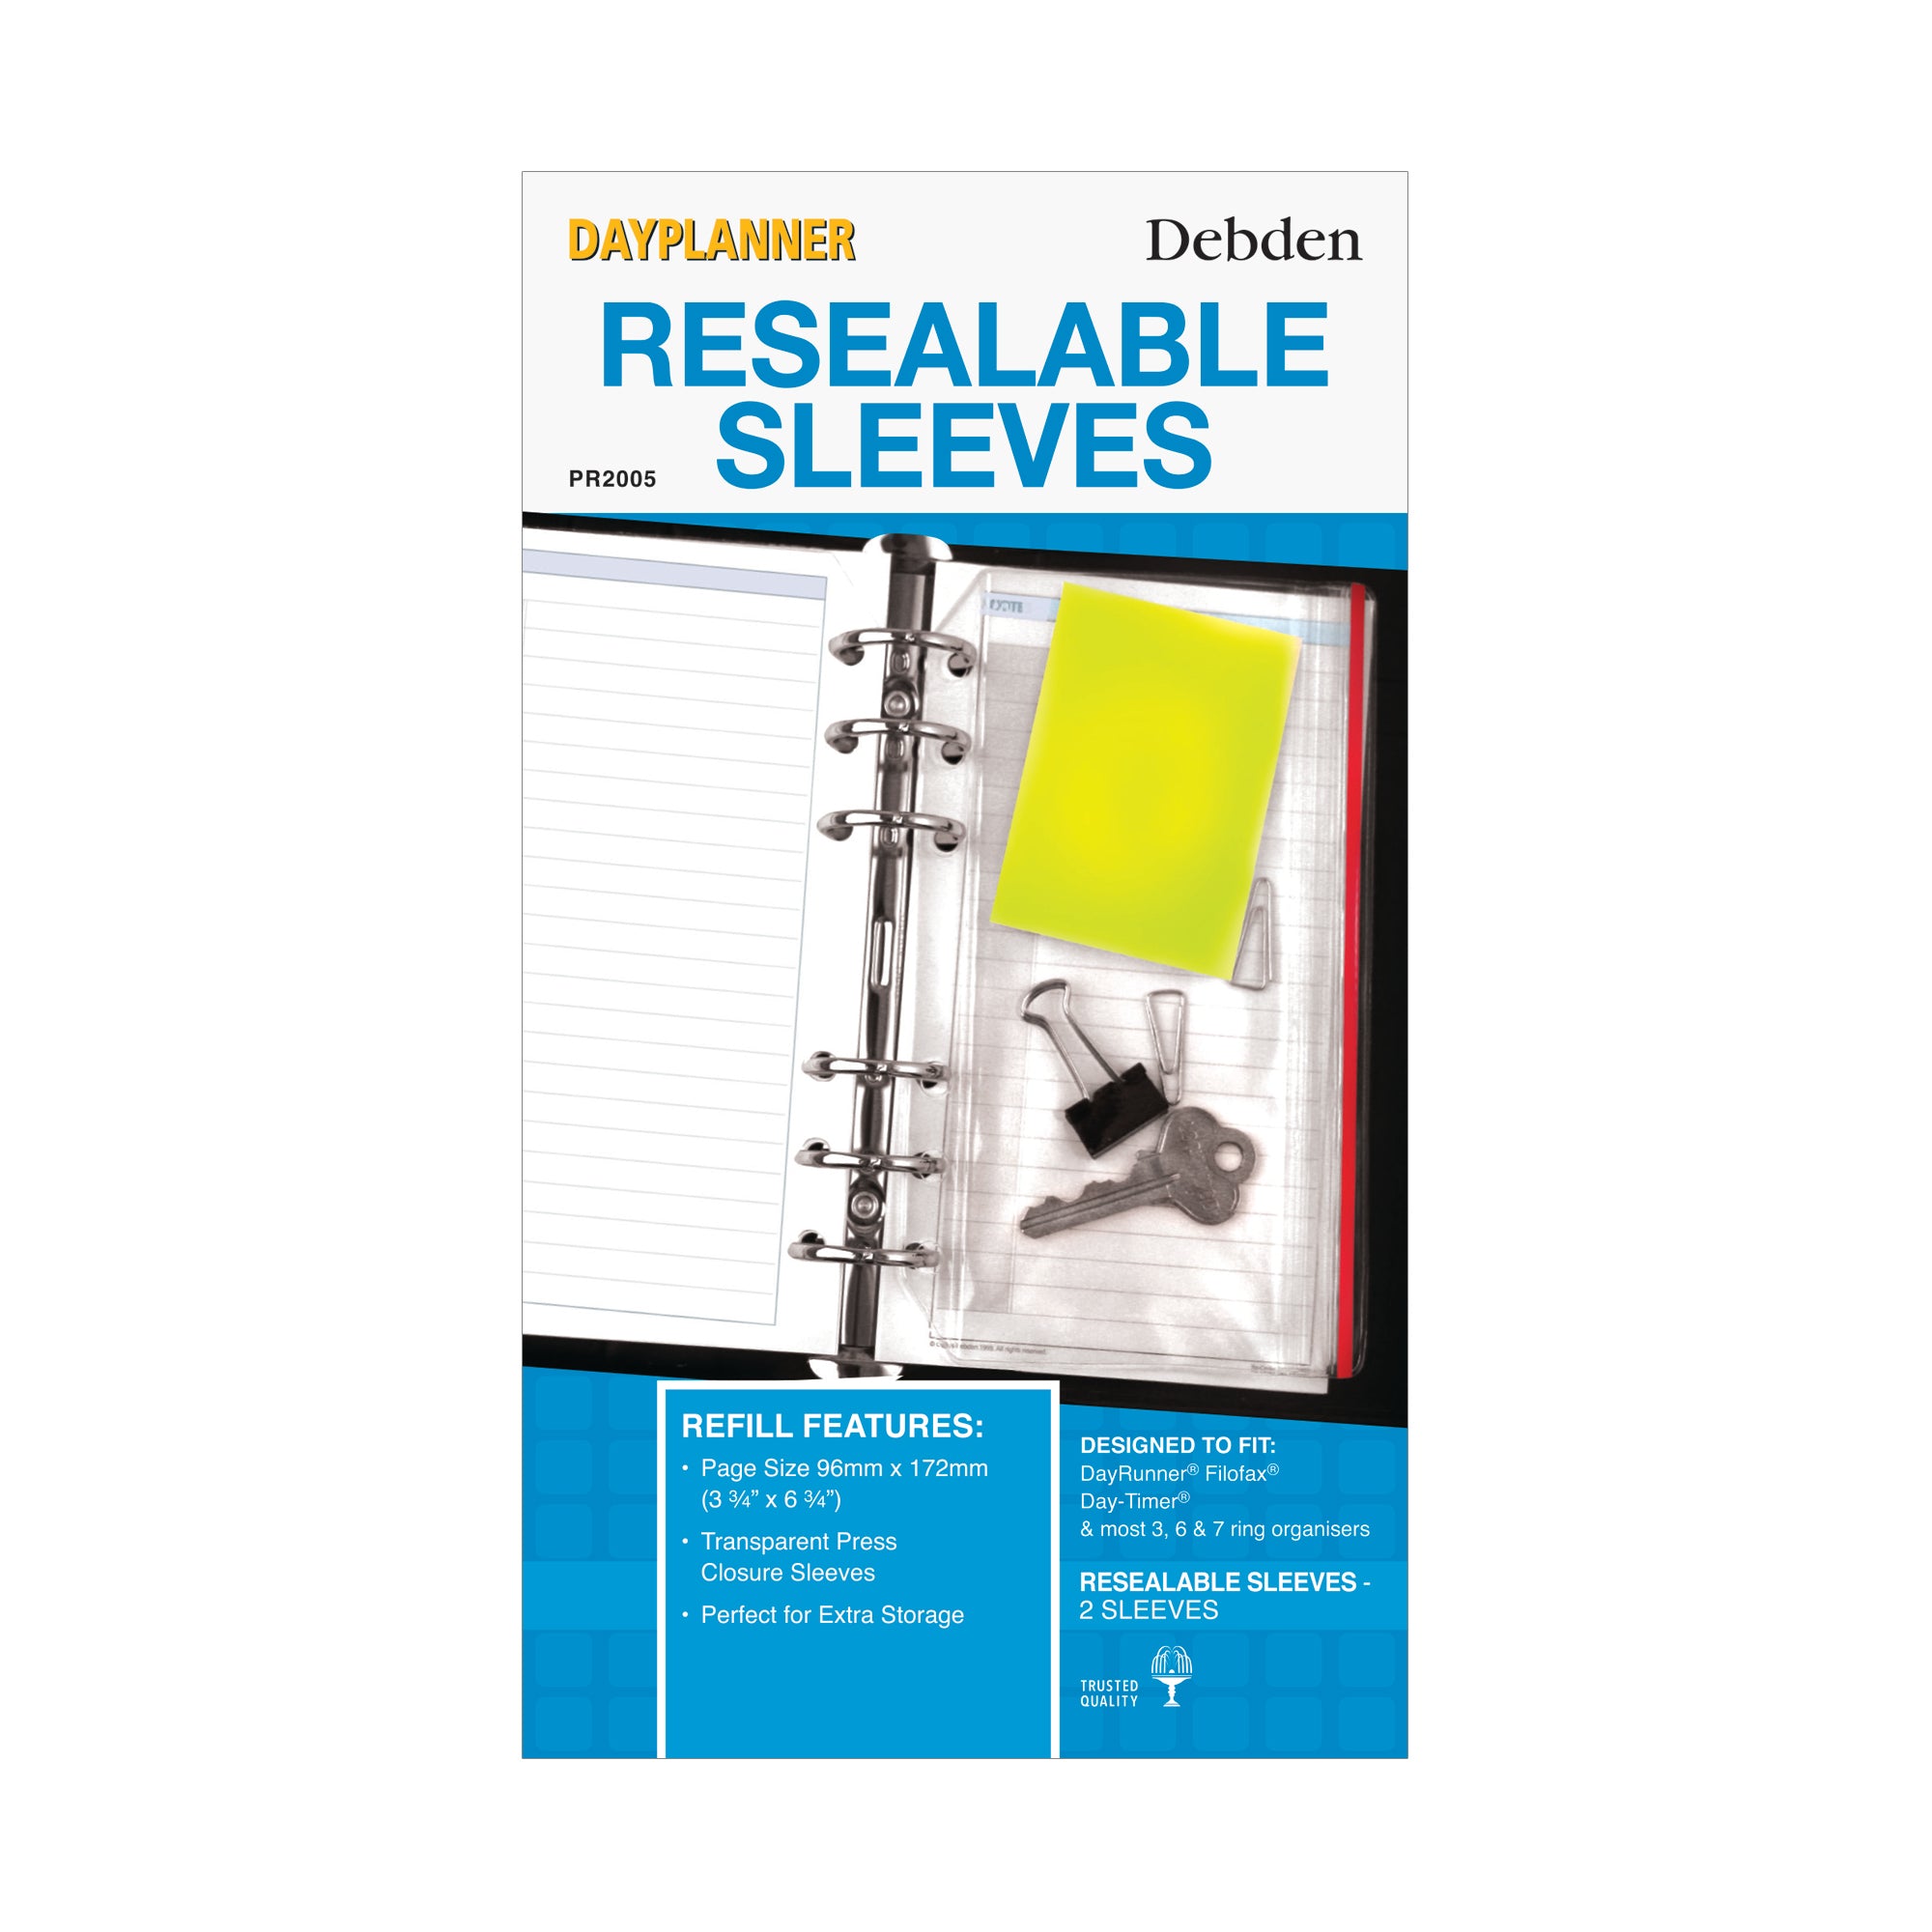 DayPlanner - Personal Size Resealable Sleeve Bag (2 Pack) - Collins Debden